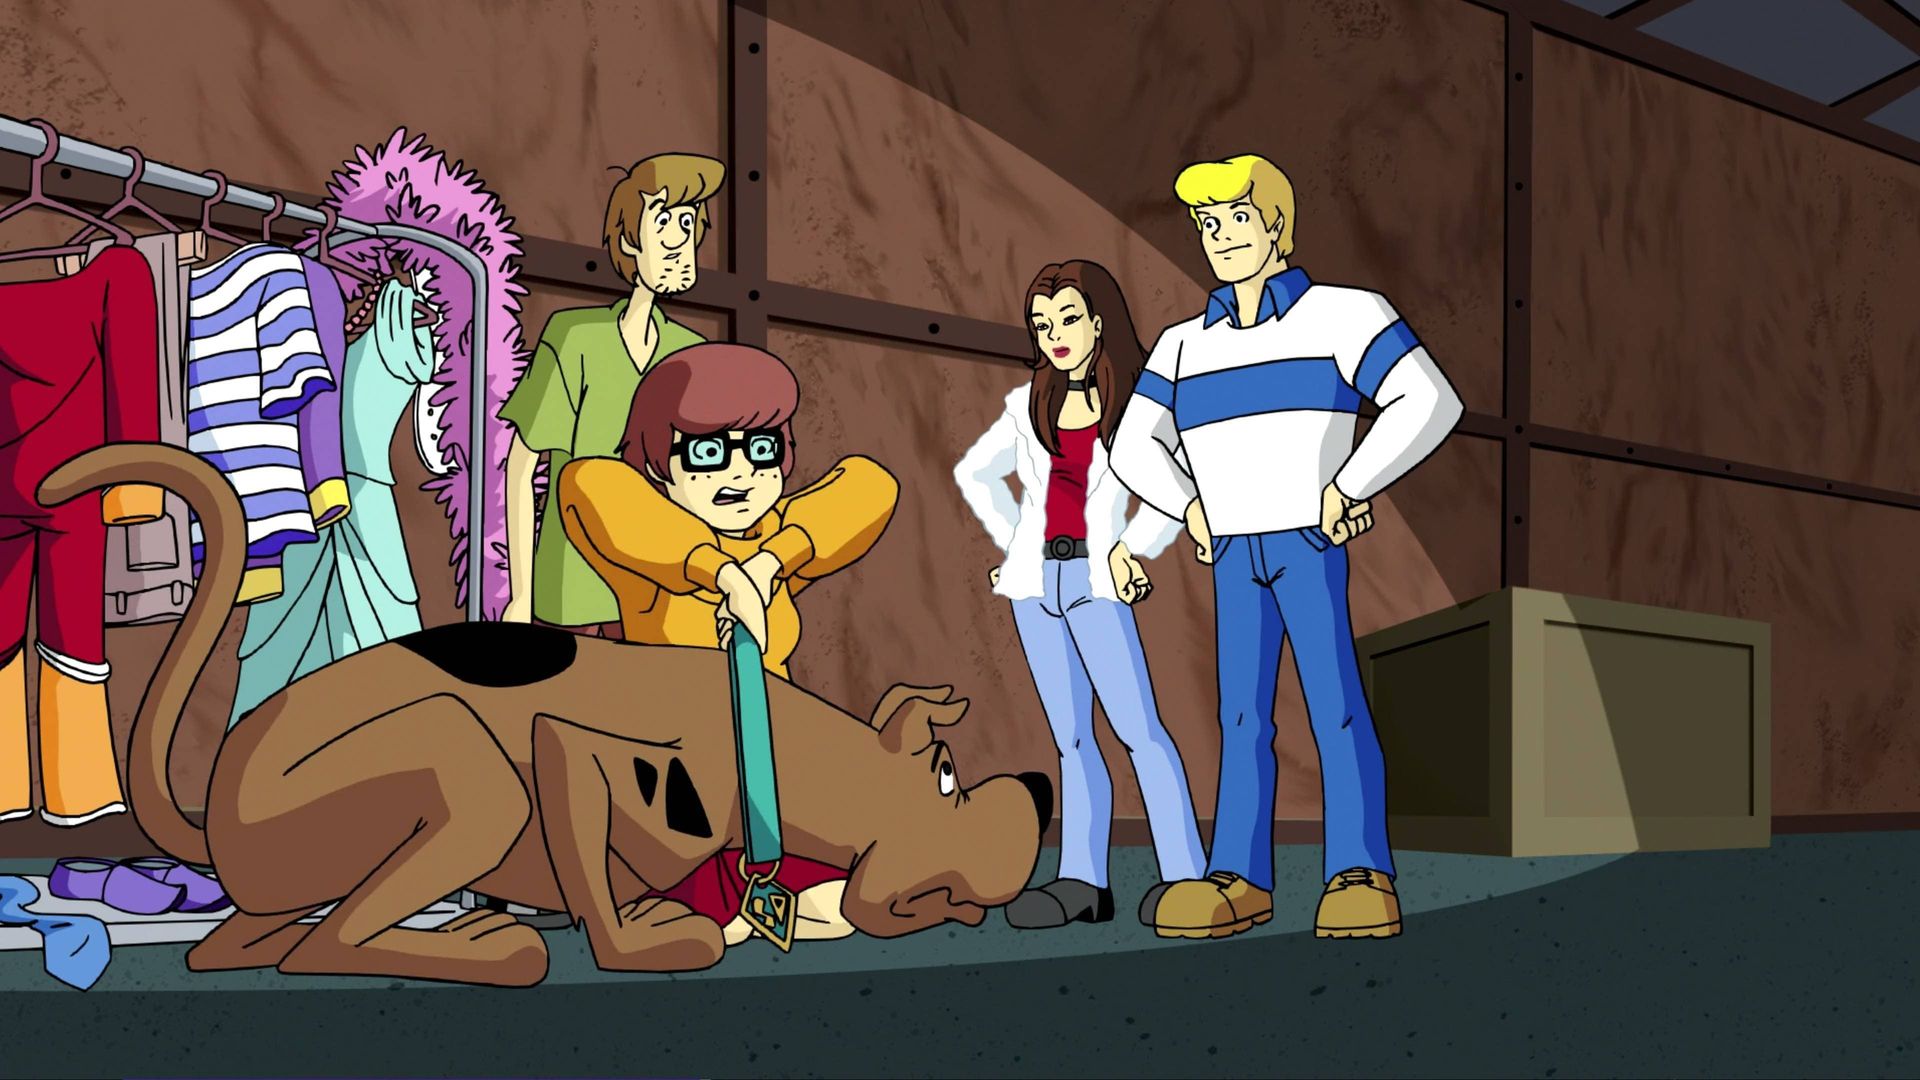 What's New, Scooby-Doo? background